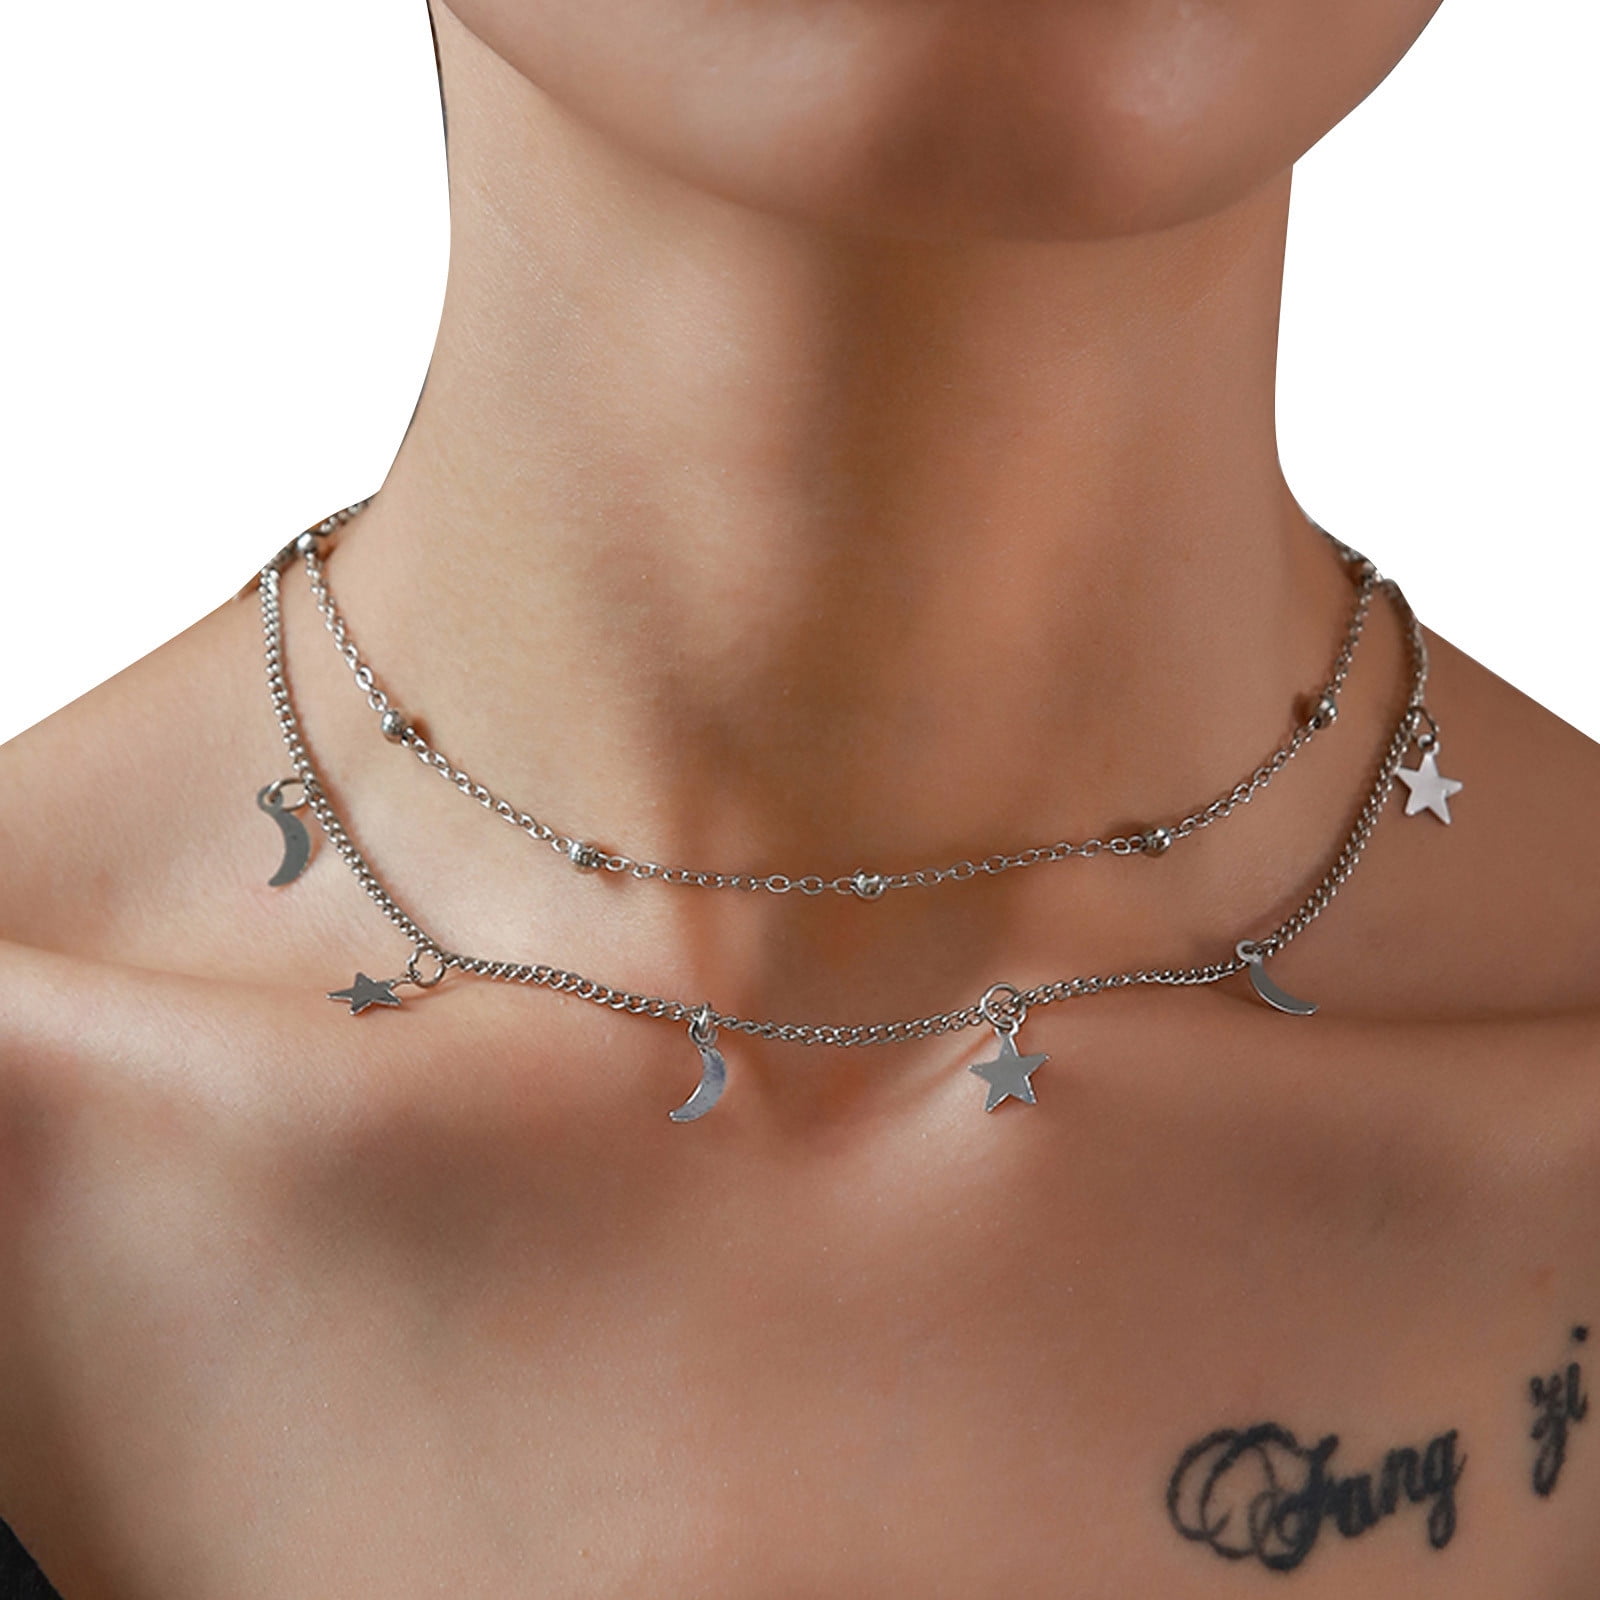 Milky Way Necklace in Gold - Charms - Chokers - Mad Lords